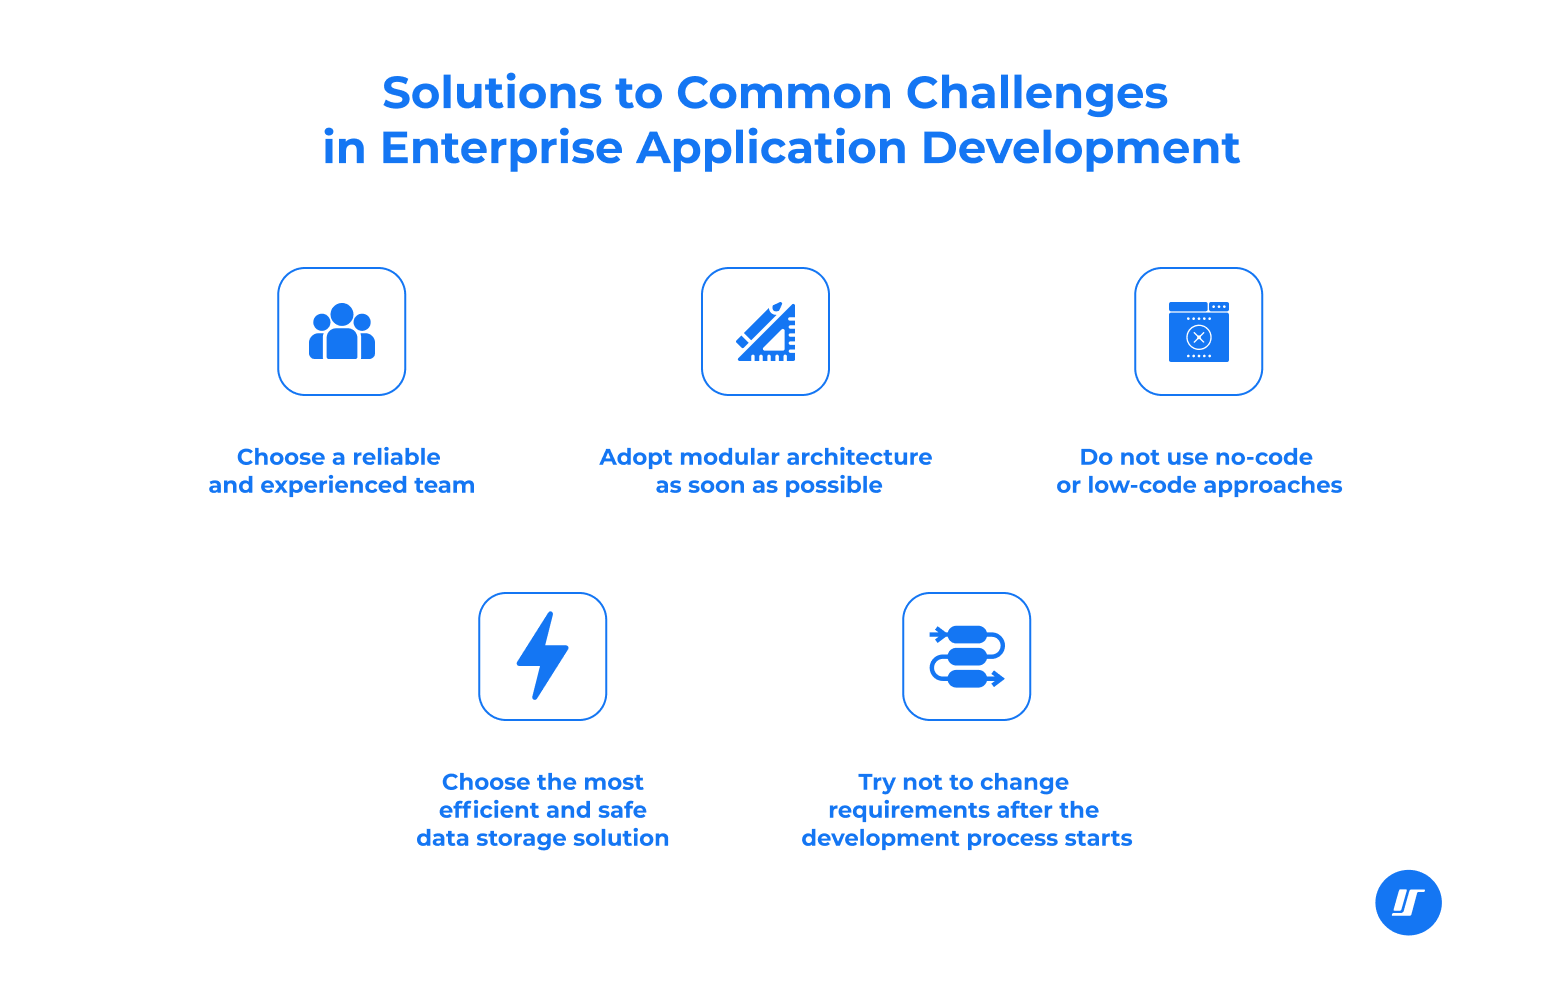 Solutions to common challenges in enterprise application development